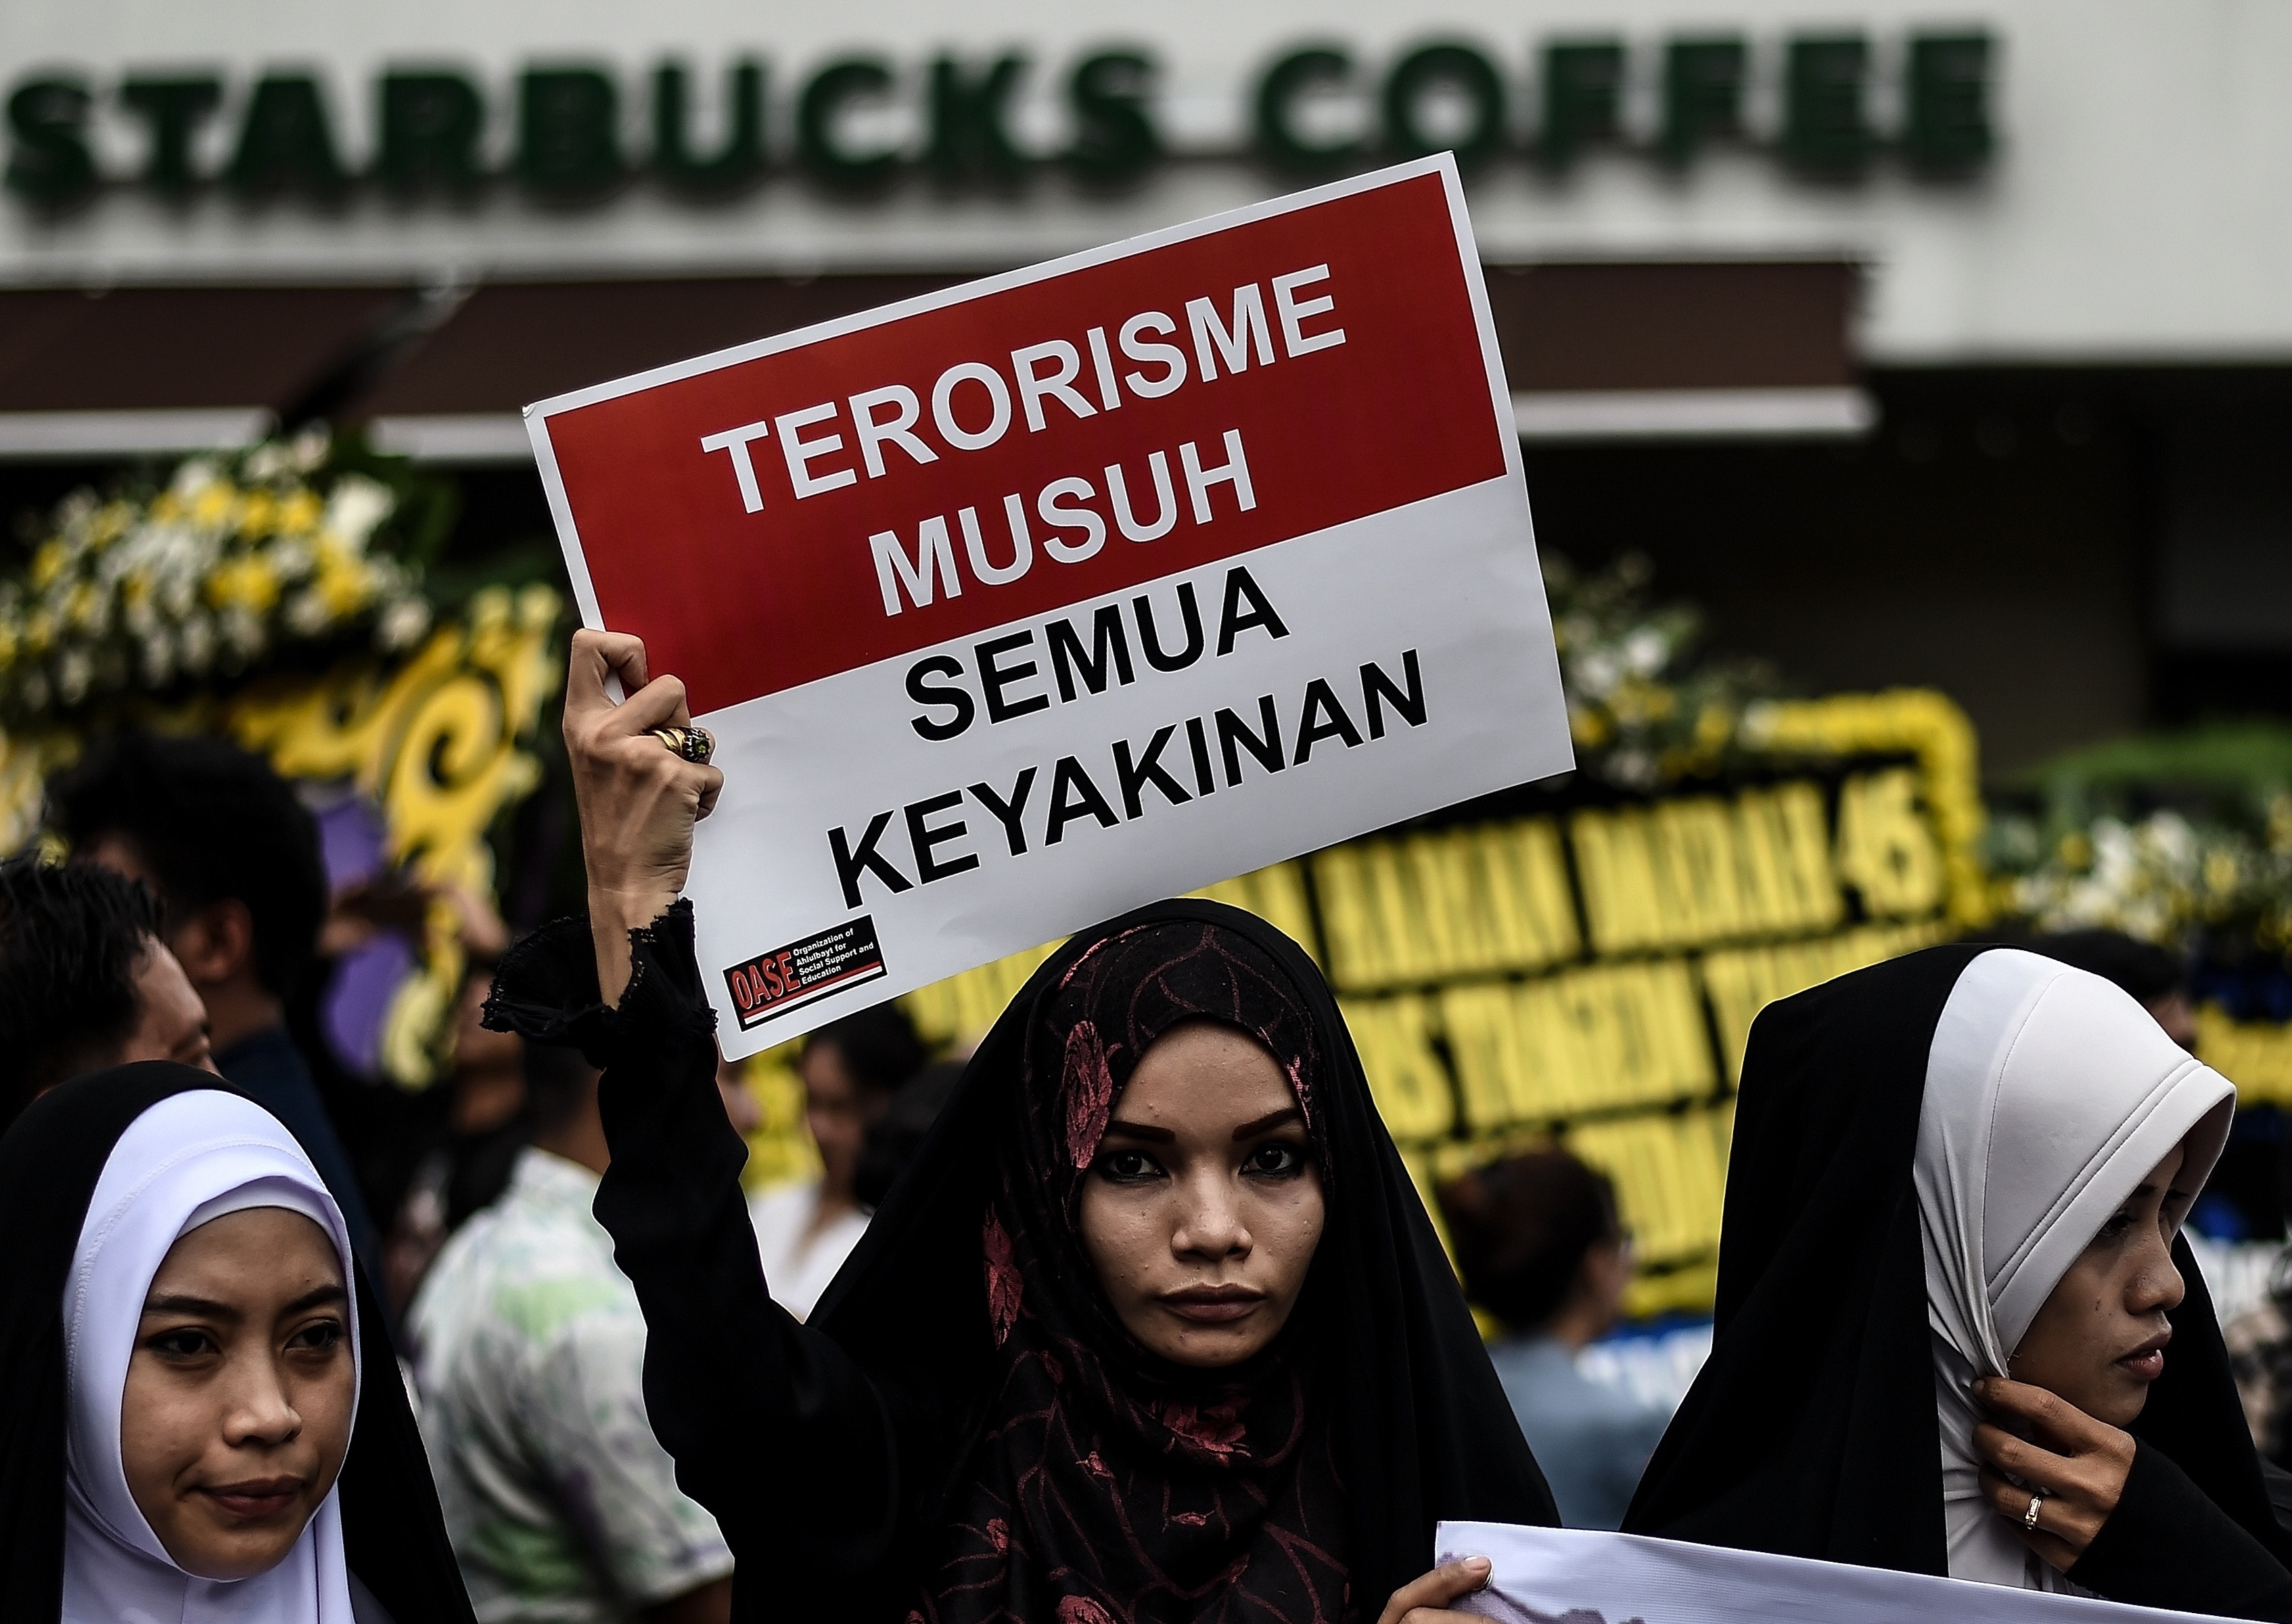 Women hold placards during a vigil outside the damaged Starbucks coffee shop in central Jakarta on Jan. 15, 2016, a day after a series of explosions hit the Indonesian capital (Manan Vatsyayana—AFP/Getty Images)